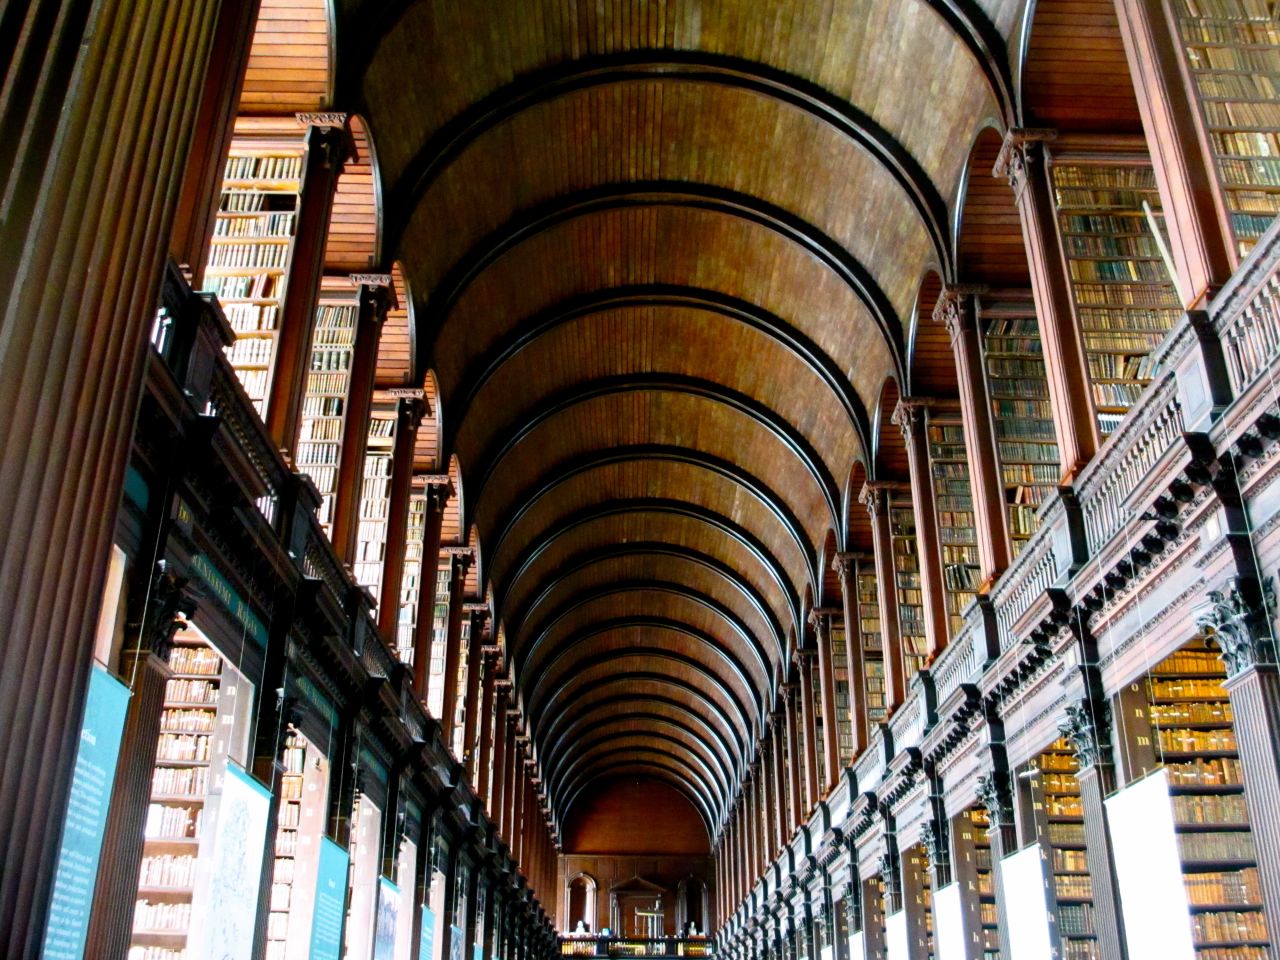 <a href="http://ireport.cnn.com/docs/DOC-1101842">The Trinity College Library in Dublin</a>, also known as the <a href="http://www.tcd.ie/Library/bookofkells/" target="_blank" target="_blank">"Old Library,"</a> is famous for housing the 9th-Century gospel manuscript the Book of Kells. At the heart of the Old Library is the Long Room, which is filled with 200,000 of the library's oldest books. 